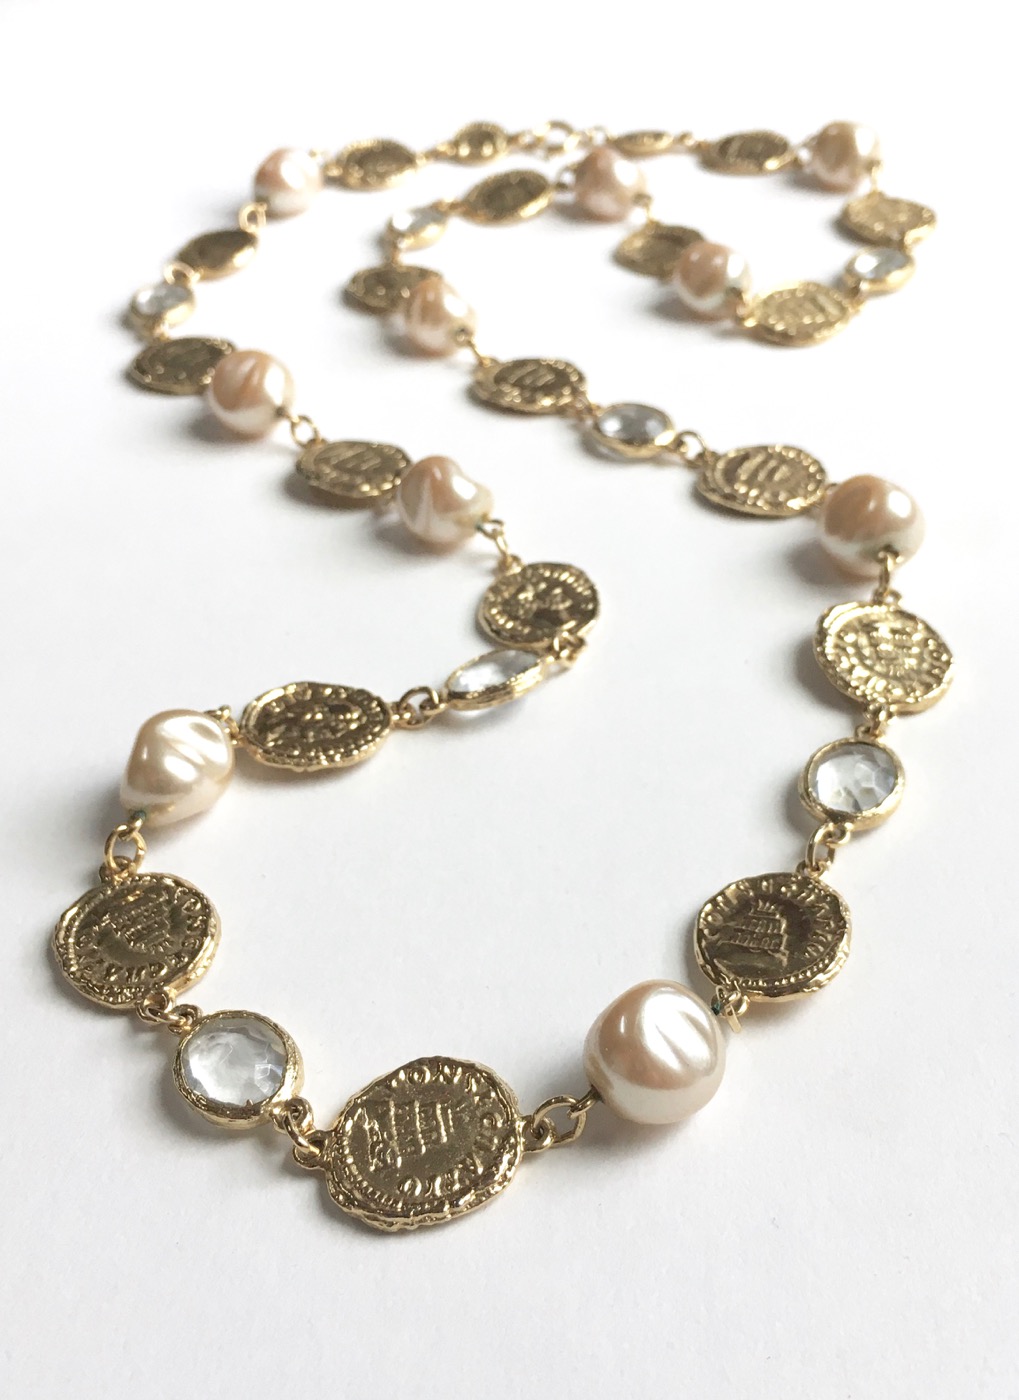 Beautiful authentic vintage Chanel baroque long pearl necklace